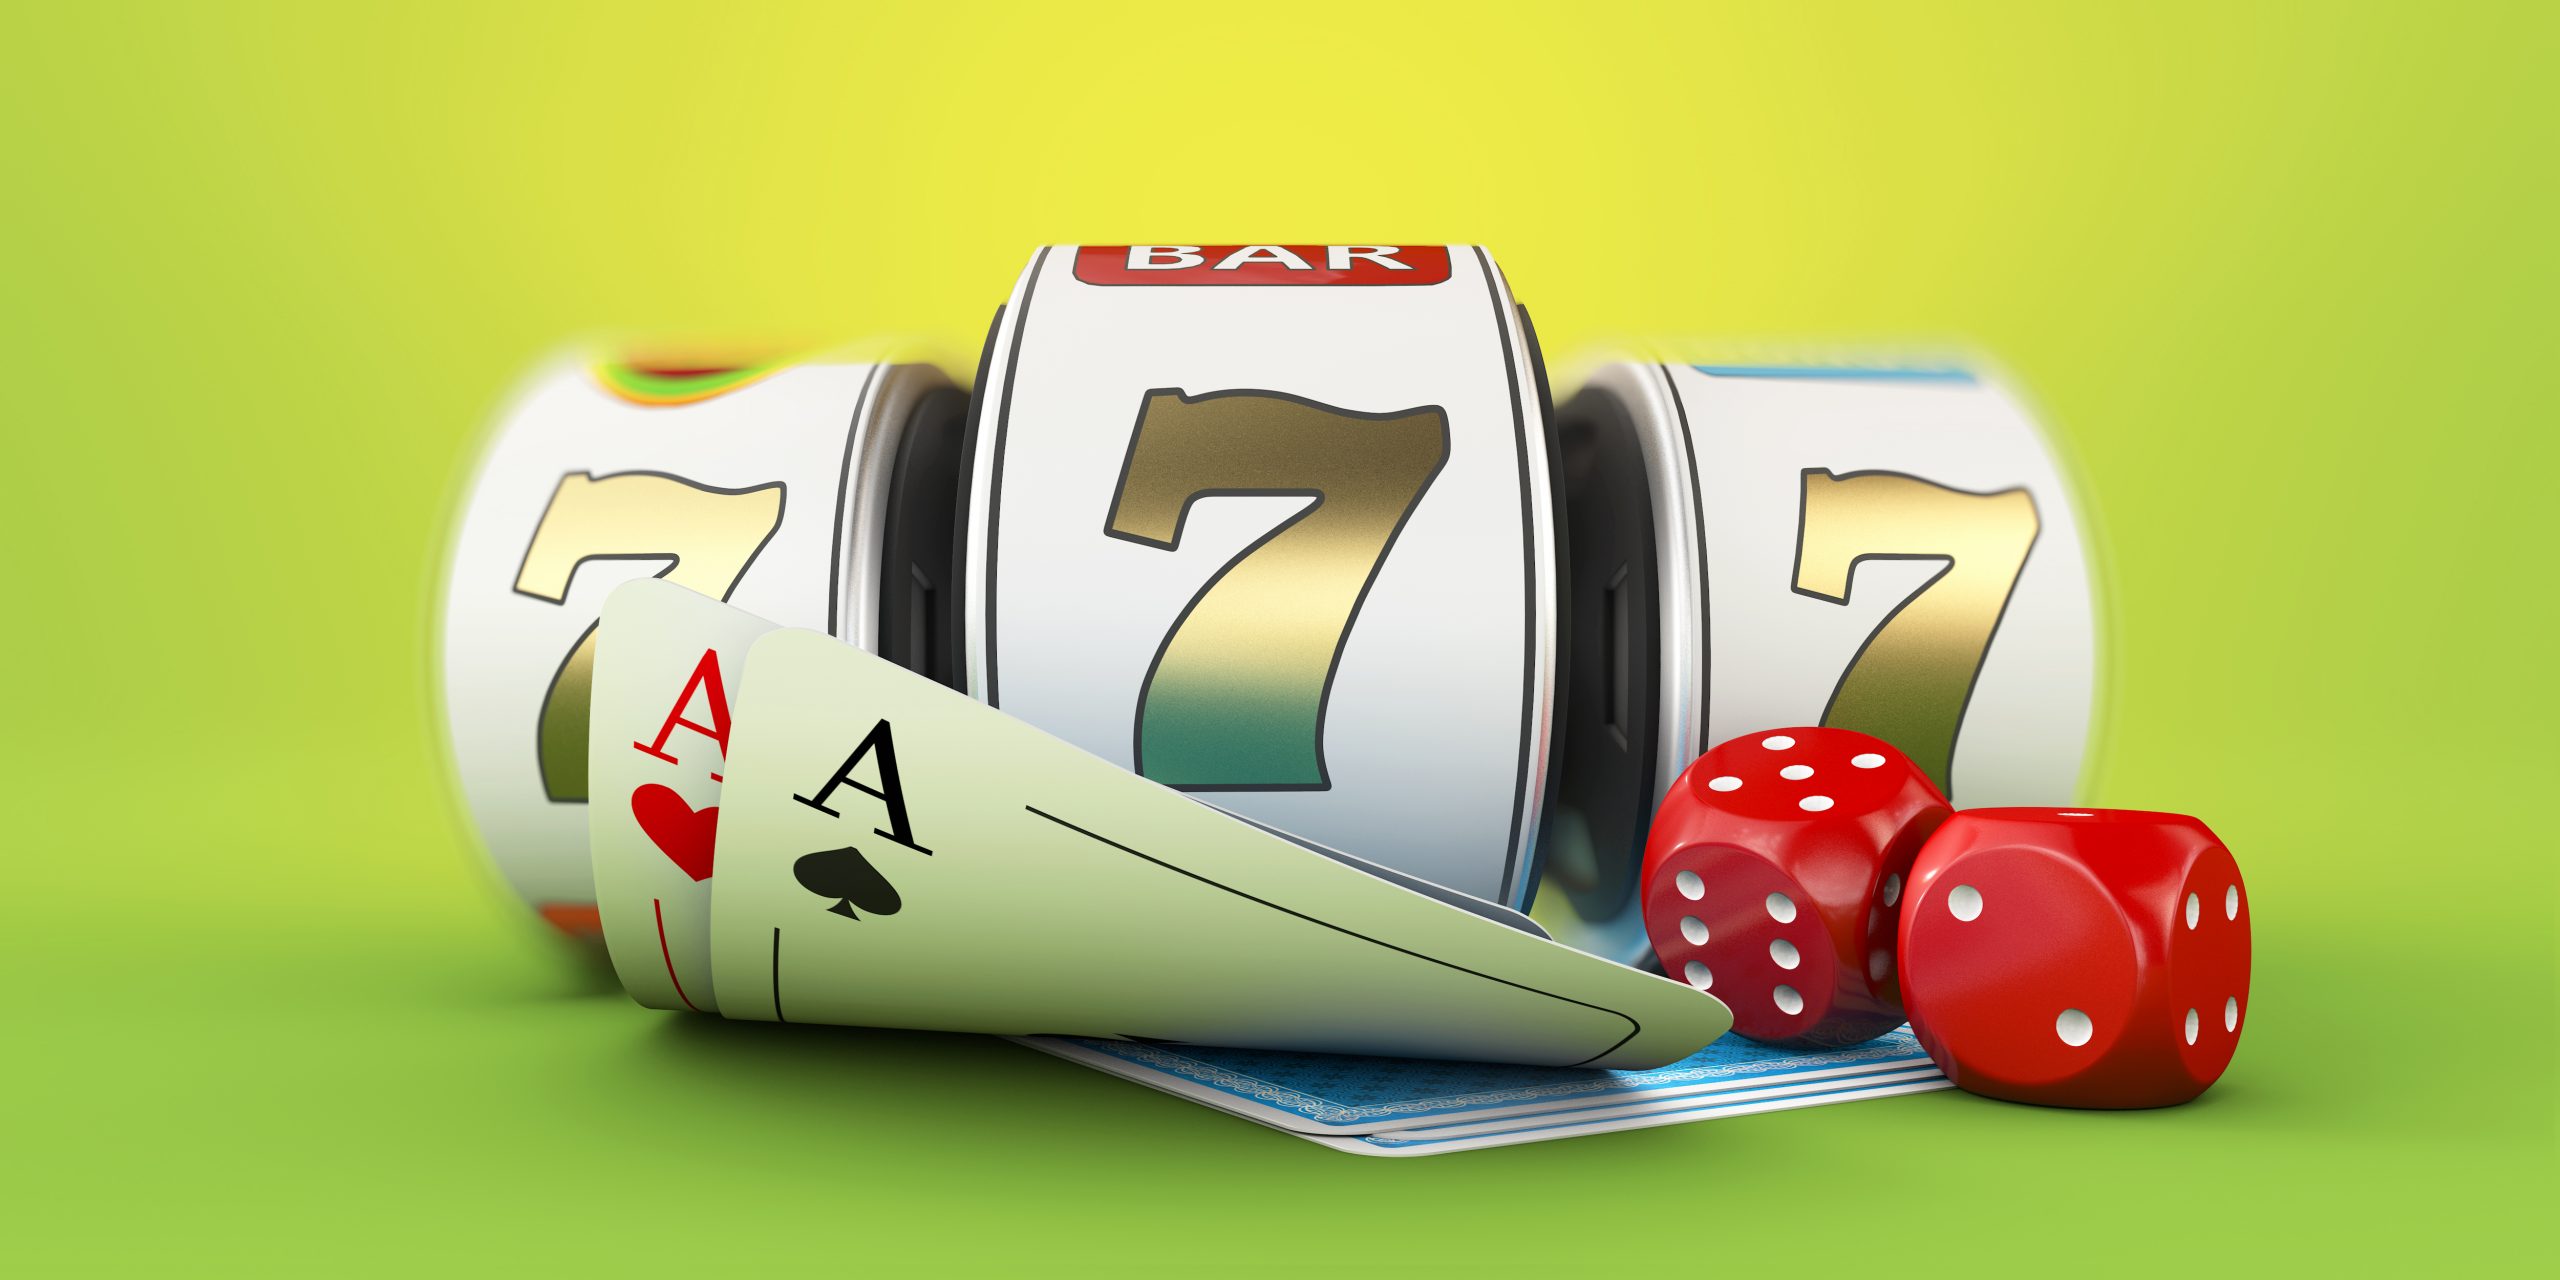 slot machine with lucky sevens jackpot dace clipping path included 3d rendering scaled Almanbahis Adres